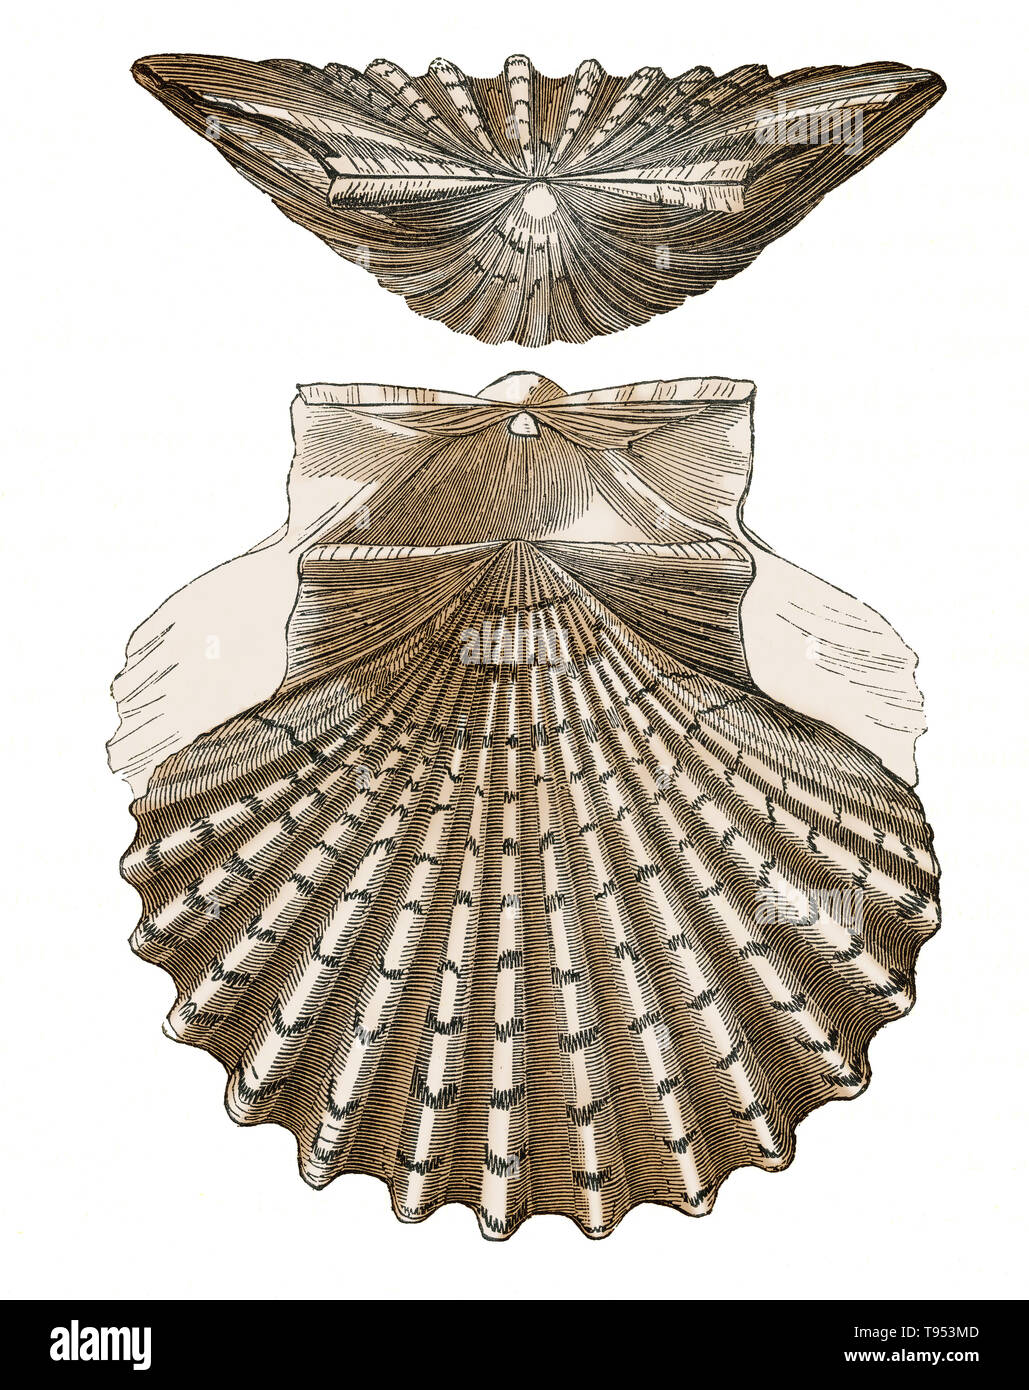 Shell of Pecten jacobaeus, a scallop from the Mediterranean Sea.  Illustration from Louis Figuier's The World Before the Deluge, 1867 American edition. Stock Photo